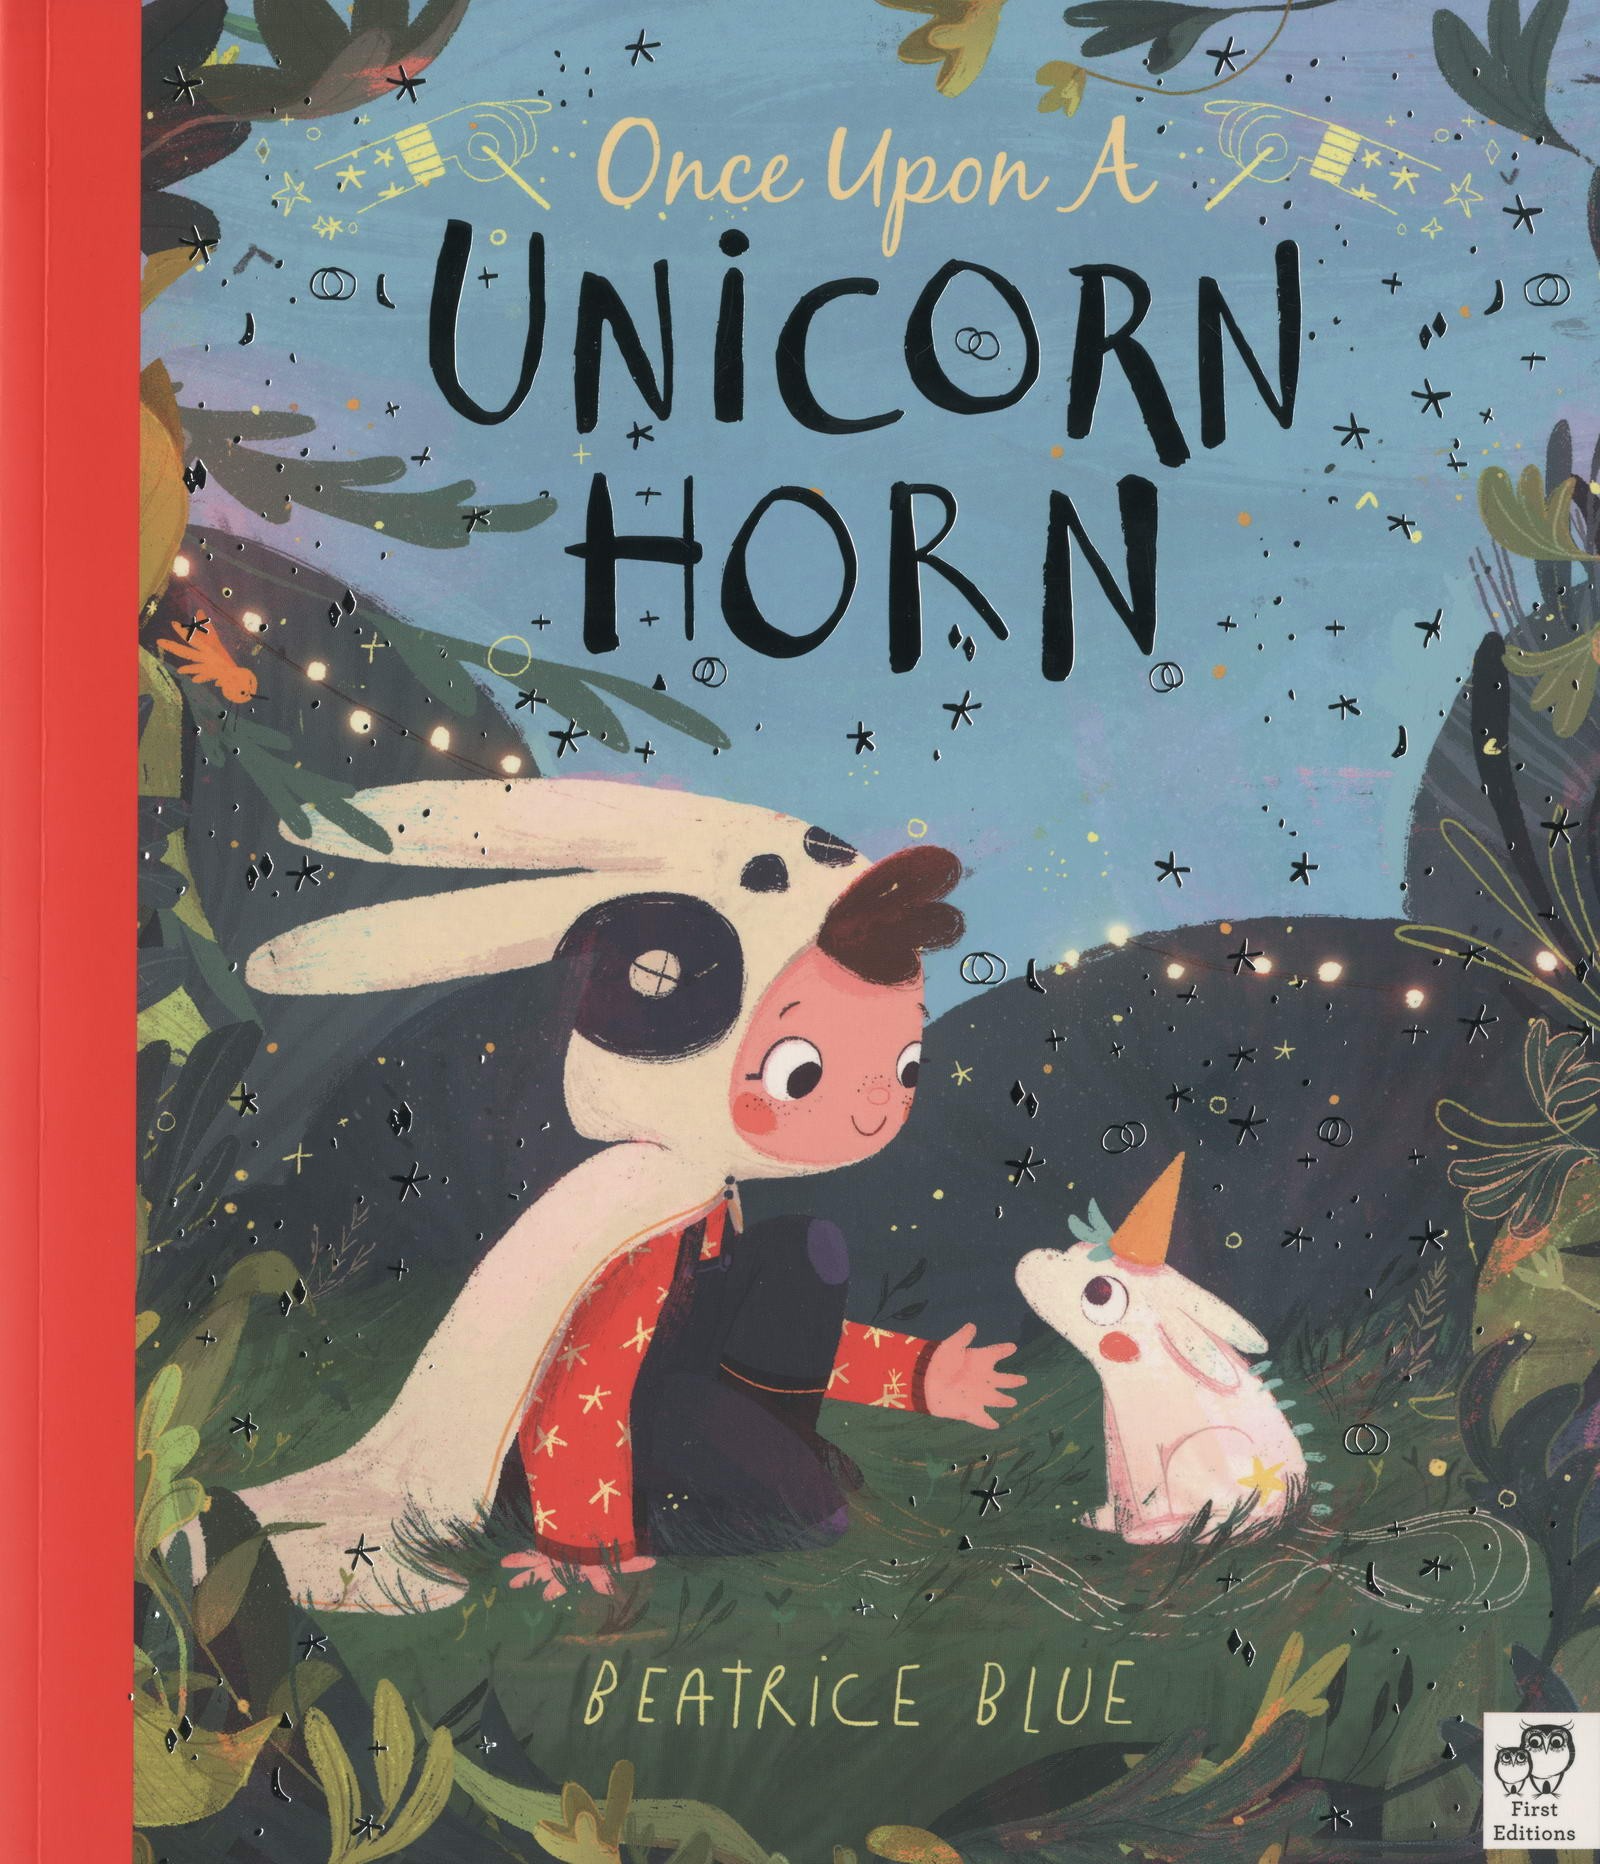 Discover Beatrice Blue new book: Once upon a Unicorn horn!